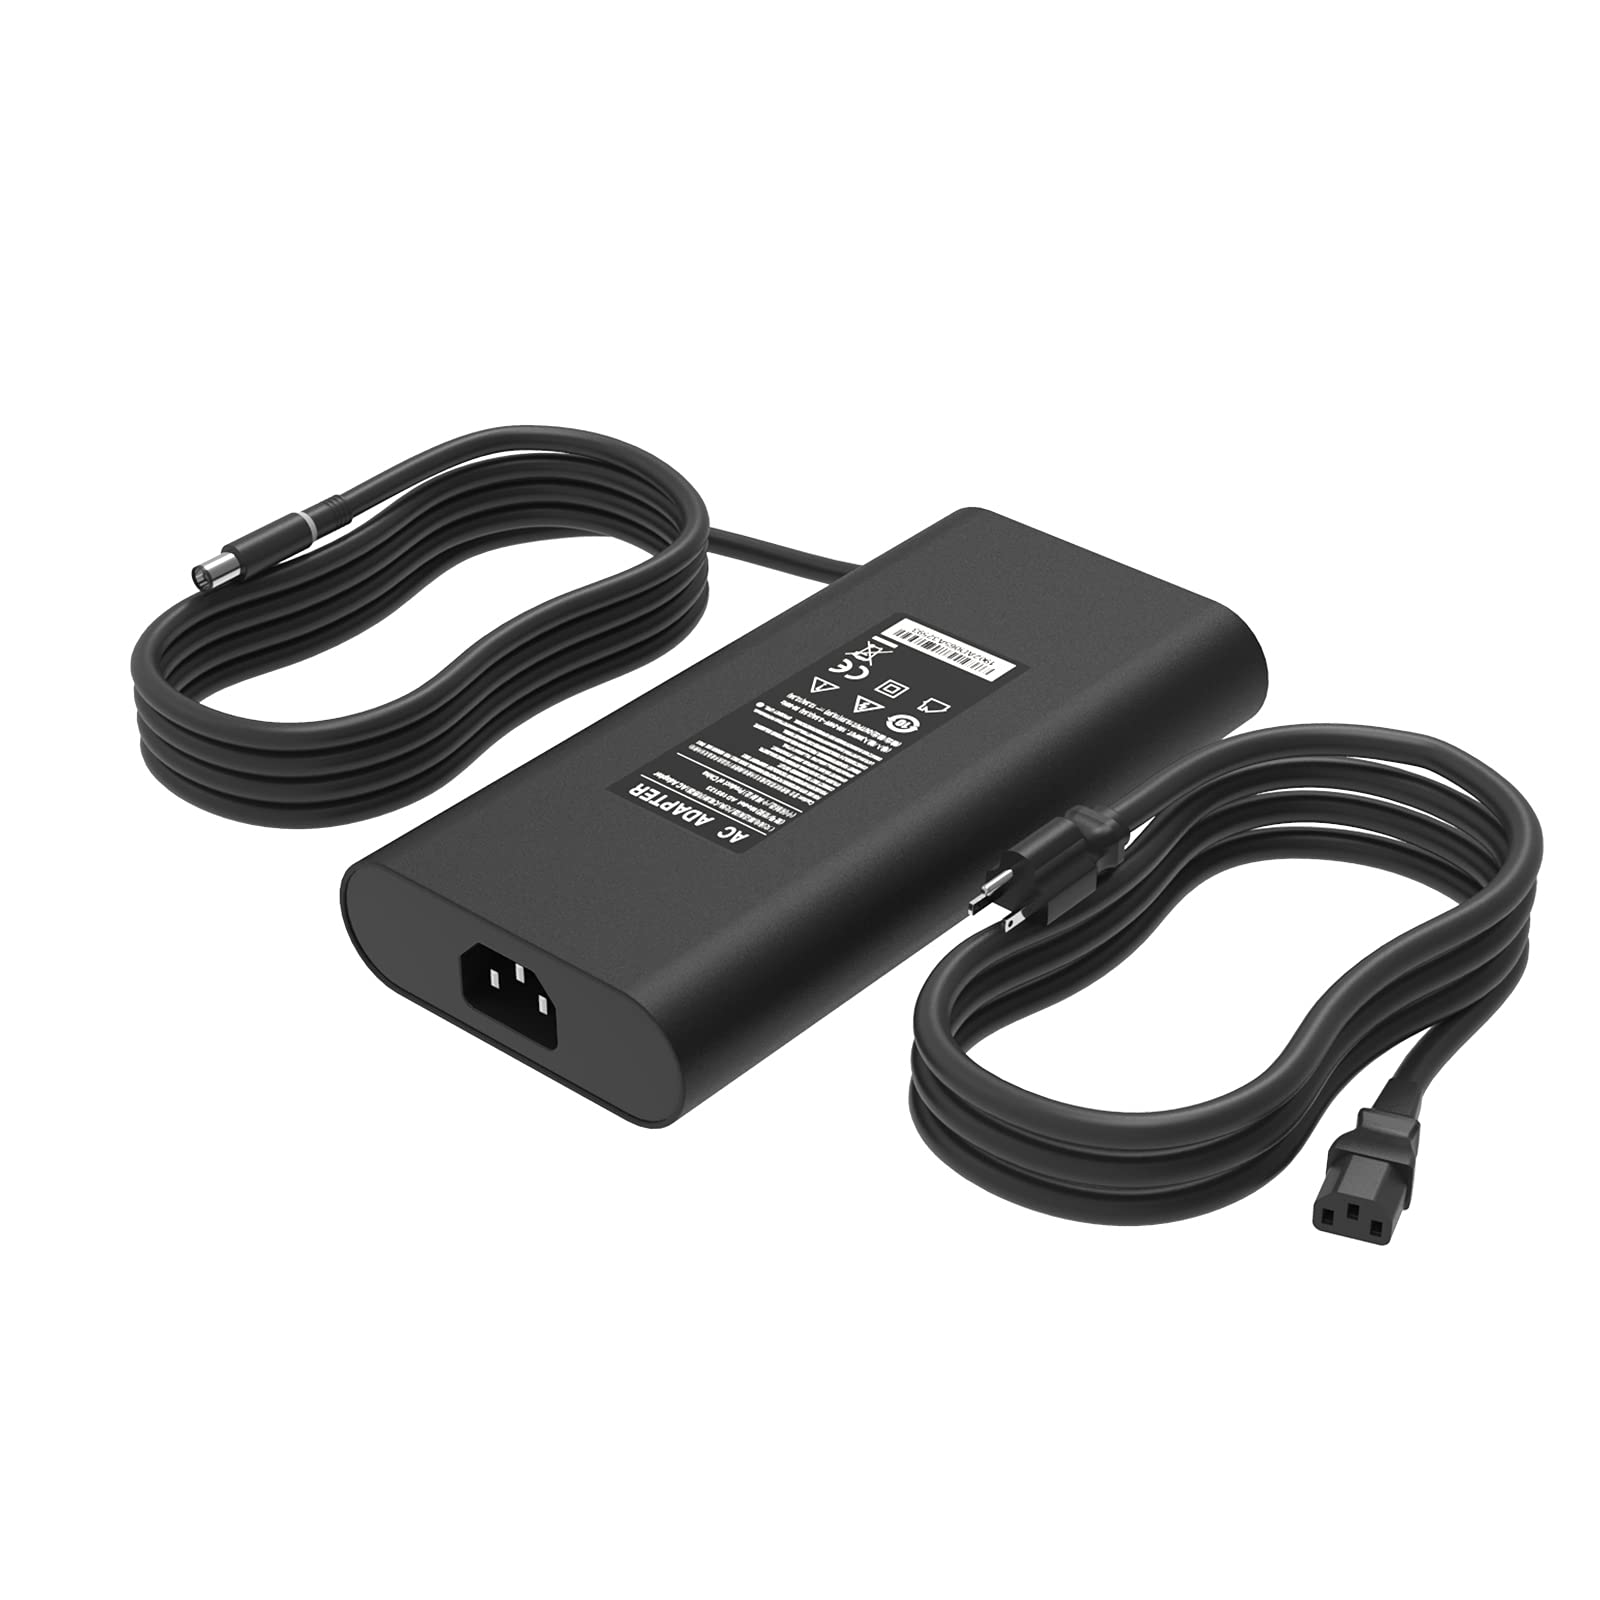 Mackertop 240W AC Adapter Charger 19.5V 12.3A Laptop Power Supply Compatible with Dell Precision 7730 7720 7520 M6800 M6500 M6600, Dell Alienware M...